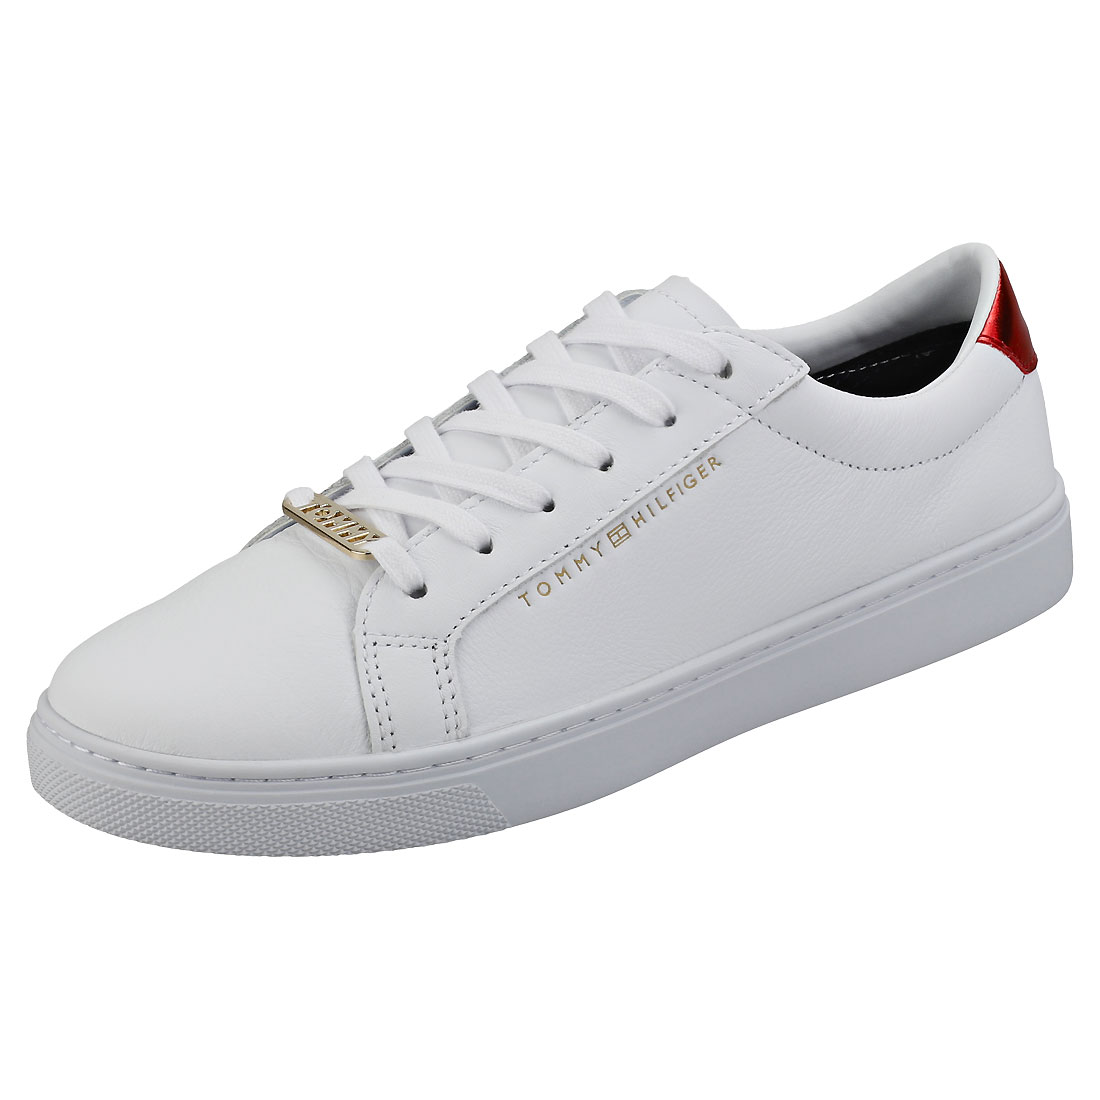 Tommy Hilfiger Trainers Sale Ladies Clearance, 57% OFF | www 